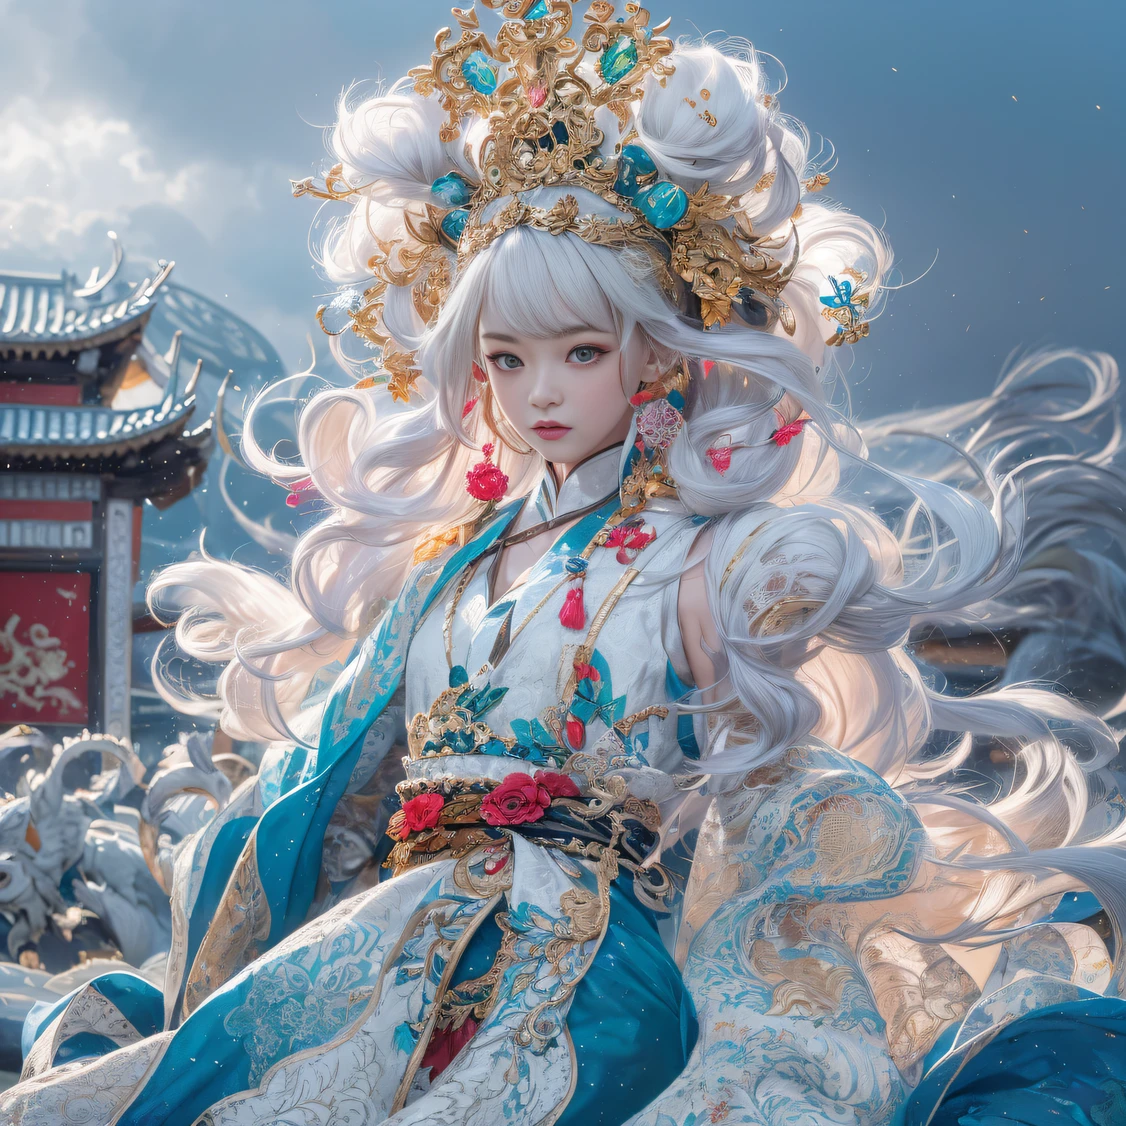 32K（tmasterpiece，k hd，hyper HD，32K）curlies，Flowing rouge，Lunar soil pool，zydink， a color， Kunlun Snow Mountain people （White Lotus Woman）， memorabilia（Blue and white scarf）， Combat posture， looking at the ground， Large rolls of rouge， Flowing rouge curls，Gold filigree headdress， Chinese long-sleeved cotton garment， （abstract ink splash：1.2）， Pink lotus background，Water lily flower protector（realisticlying：1.4），Rouge hair，Autumn is in full swing，The background is pure， A high resolution， the detail， RAW photogr， Sharp Re， Nikon D850 Film Stock Photo by Jefferies Lee 4 Kodak Portra 400 Camera F1.6 shots, Rich colors, ultra-realistic vivid textures, Dramatic lighting, Unreal Engine Art Station Trend, cinestir 800，Large curls，Flowing rouge，32K（tmasterpiece，k hd，hyper HD，32K）curlies，Flowing rouge，Lunar soil pool，zydink， a color， Kunlun Snow Mountain people （Naked female big breast）， memorabilia（Blue and white scarf）， Combat posture， looking at the ground， Large rolls of rouge， Flowing rouge curls，Gold filigree headdress， Chinese long-sleeved cotton garment， （abstract ink splash：1.2）， Pink lotus background，Water lily flower protector（realisticlying：1.4），Rouge hair，Autumn is in full swing，The background is pure， A high resolution， the detail， RAW photogr， Sharp Re， Nikon D850 Film Stock Photo by Jefferies Lee 4 Kodak Portra 400 Camera F1.6 shots, Rich colors, ultra-realistic vivid textures, Dramatic lighting, Unreal Engine Art Station Trend, cinestir 800，Large curls，Flowing rouge，curlies，Flowing rouge，Lunar soil pool，zydink， a color， Kunlun Snow Mountain people （Naked female big breast）， memorabilia（Blue and white scarf）， Combat posture， looking at the ground， Large rolls of rouge， Flowing rouge curls，Gold filigree headdress， Chinese long-sleeved cotton garment， （abstract ink splash：1.2）， Pink lotus background，Water lily flower protector（realisticlying：1.4），Rouge hair，Autumn is in full swing，The background is pure， A high resolution， the detail， RAW photogr， Sharp Re， Nico